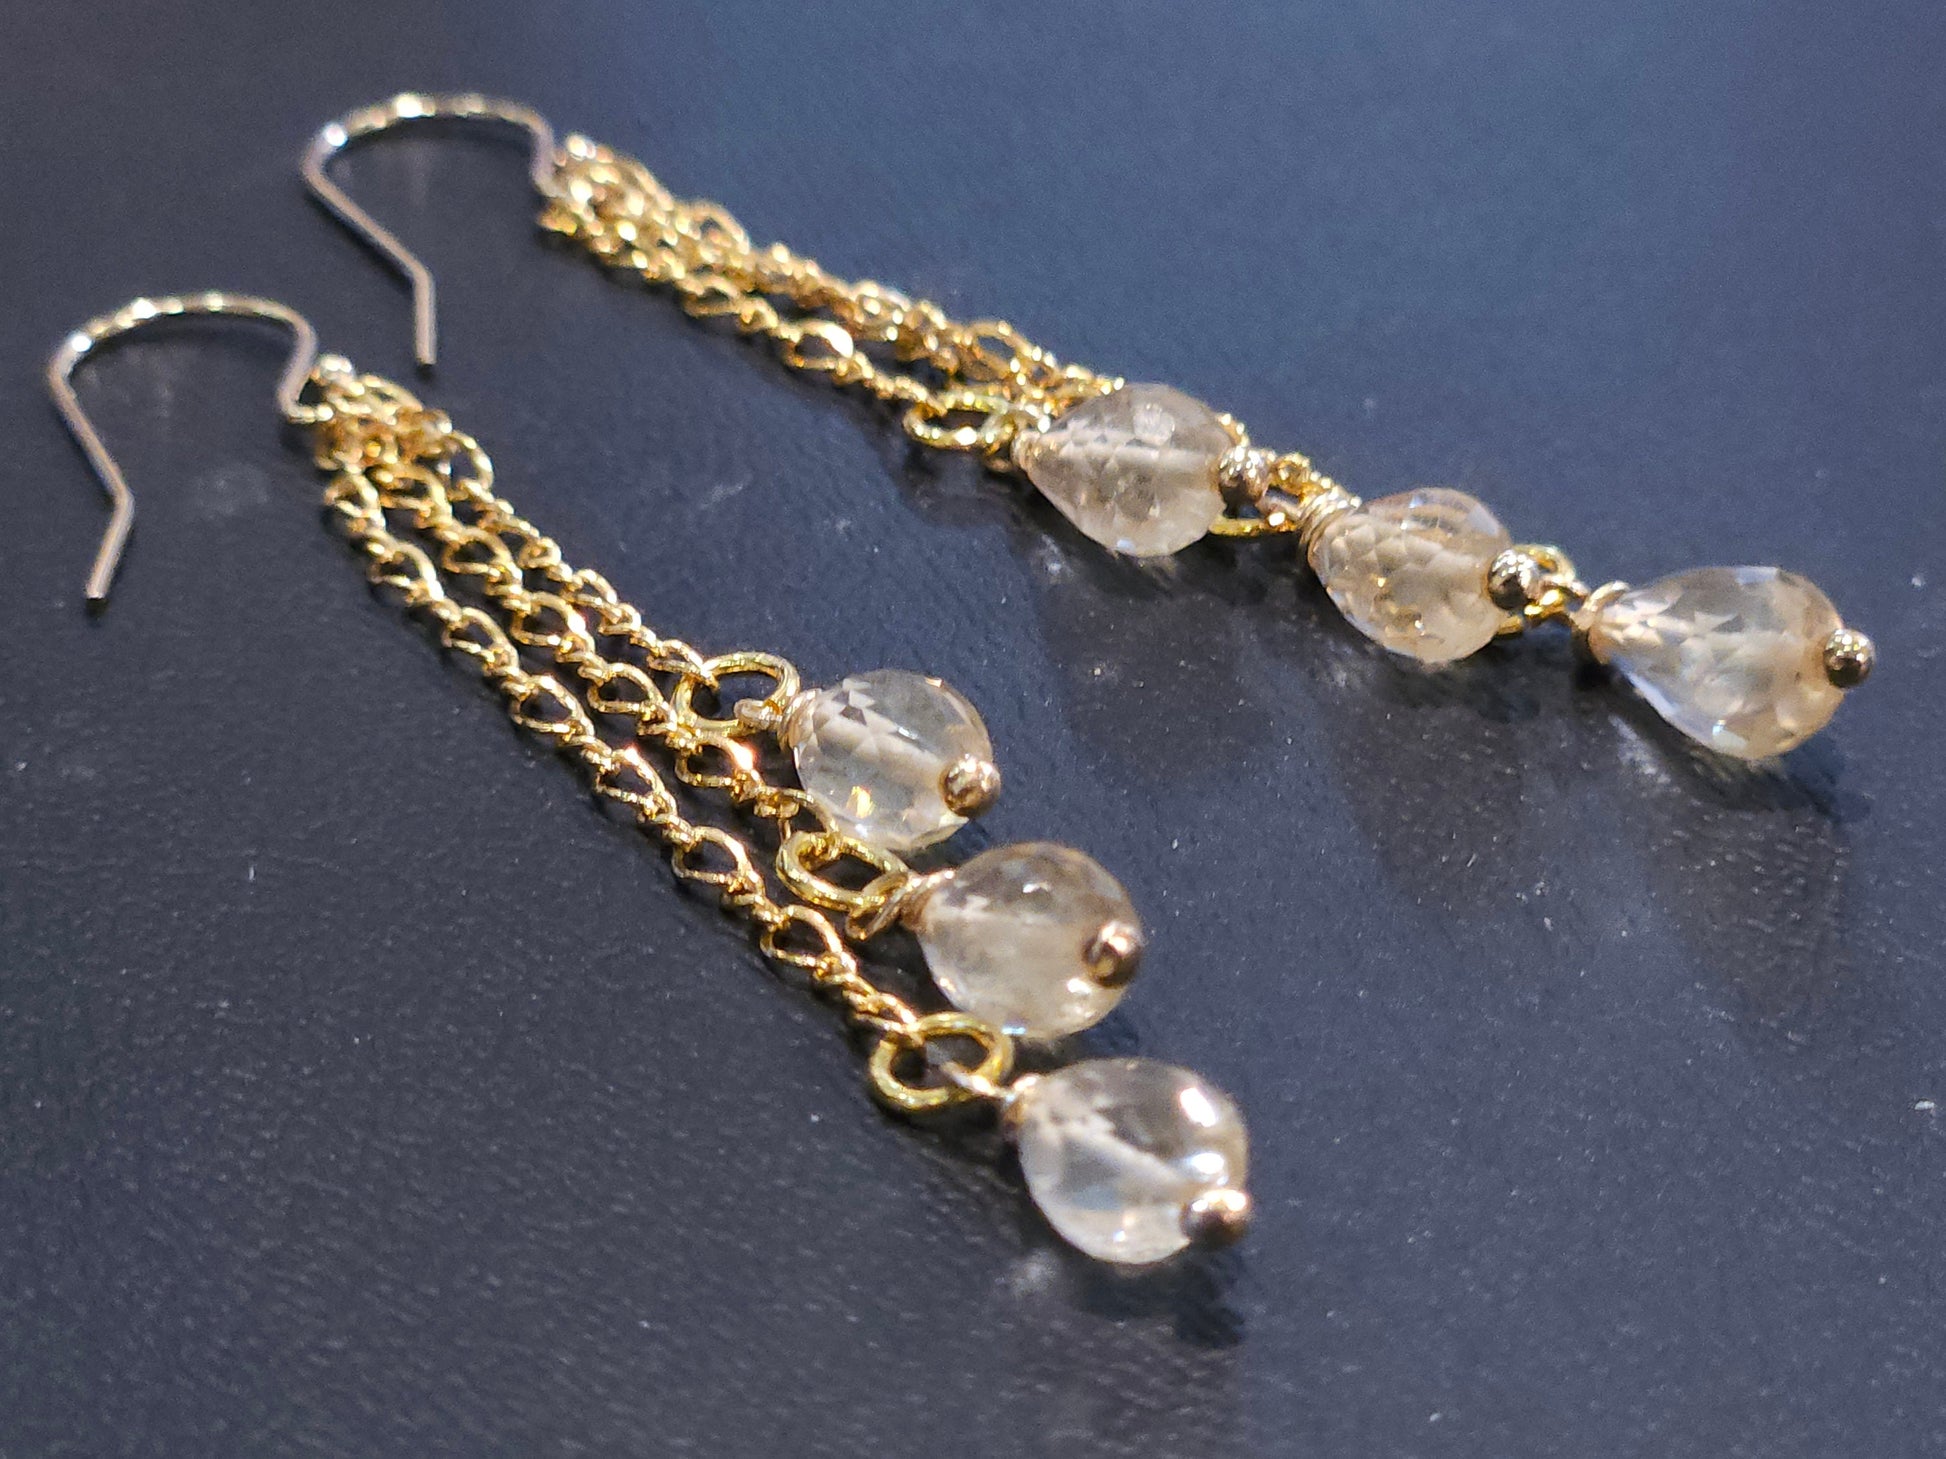 Genuine Citrine Faceted 3 Drop Dangling Wire Wrapped 5x7mm Drop, 14K Gold Filled Chain and Hook Earrings